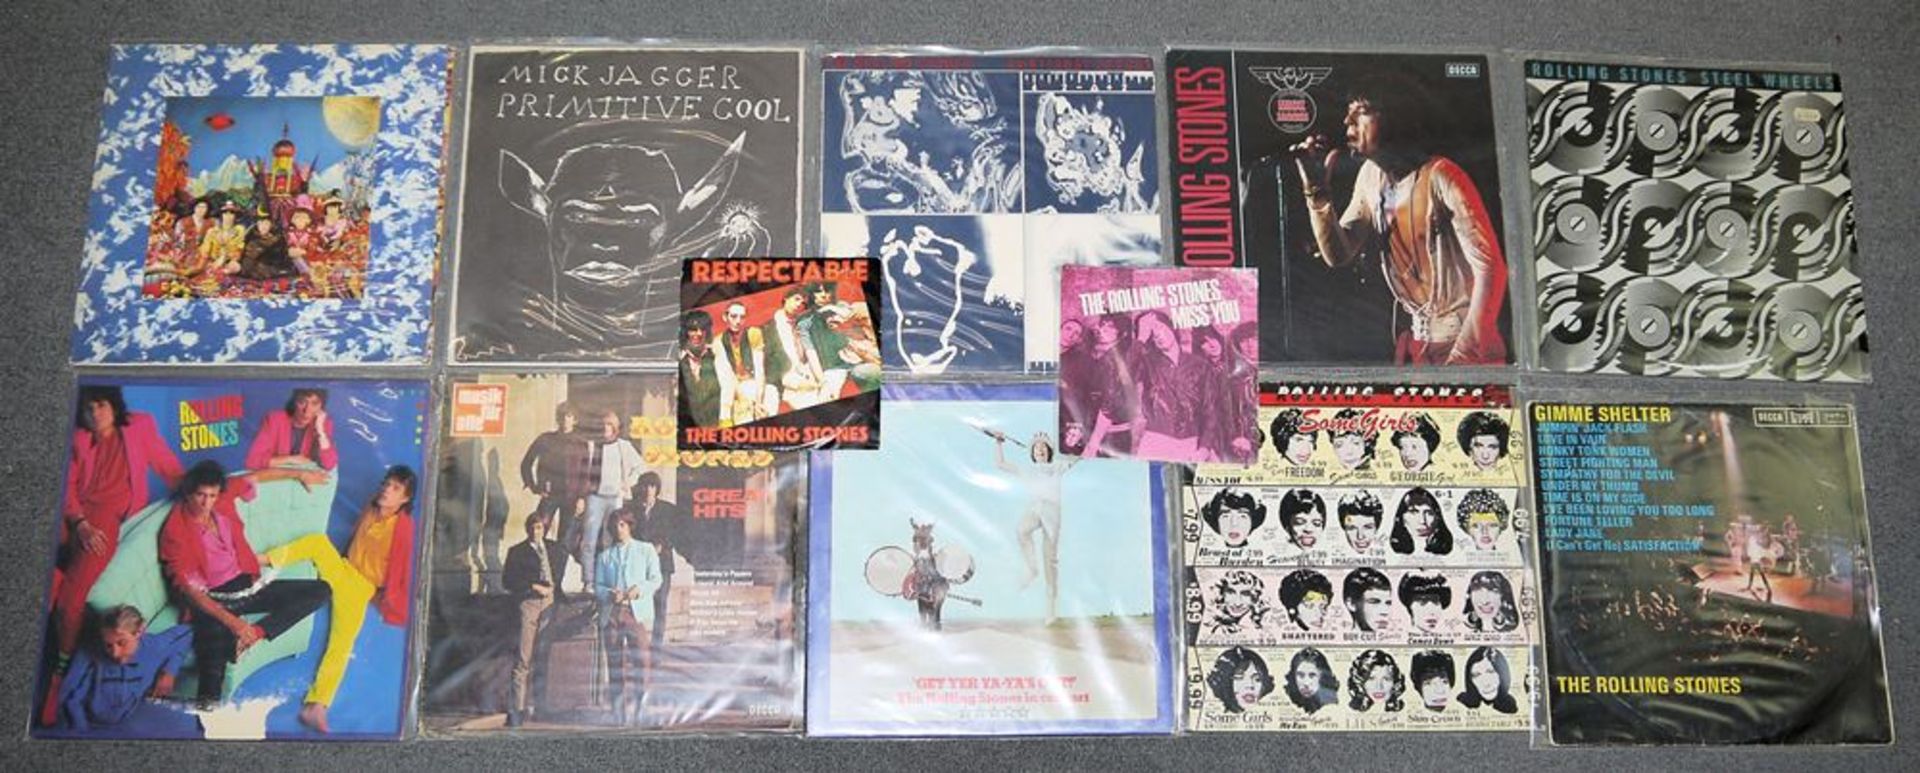 The Rolling Stones, collection of 10 long-playing records and 2 singles